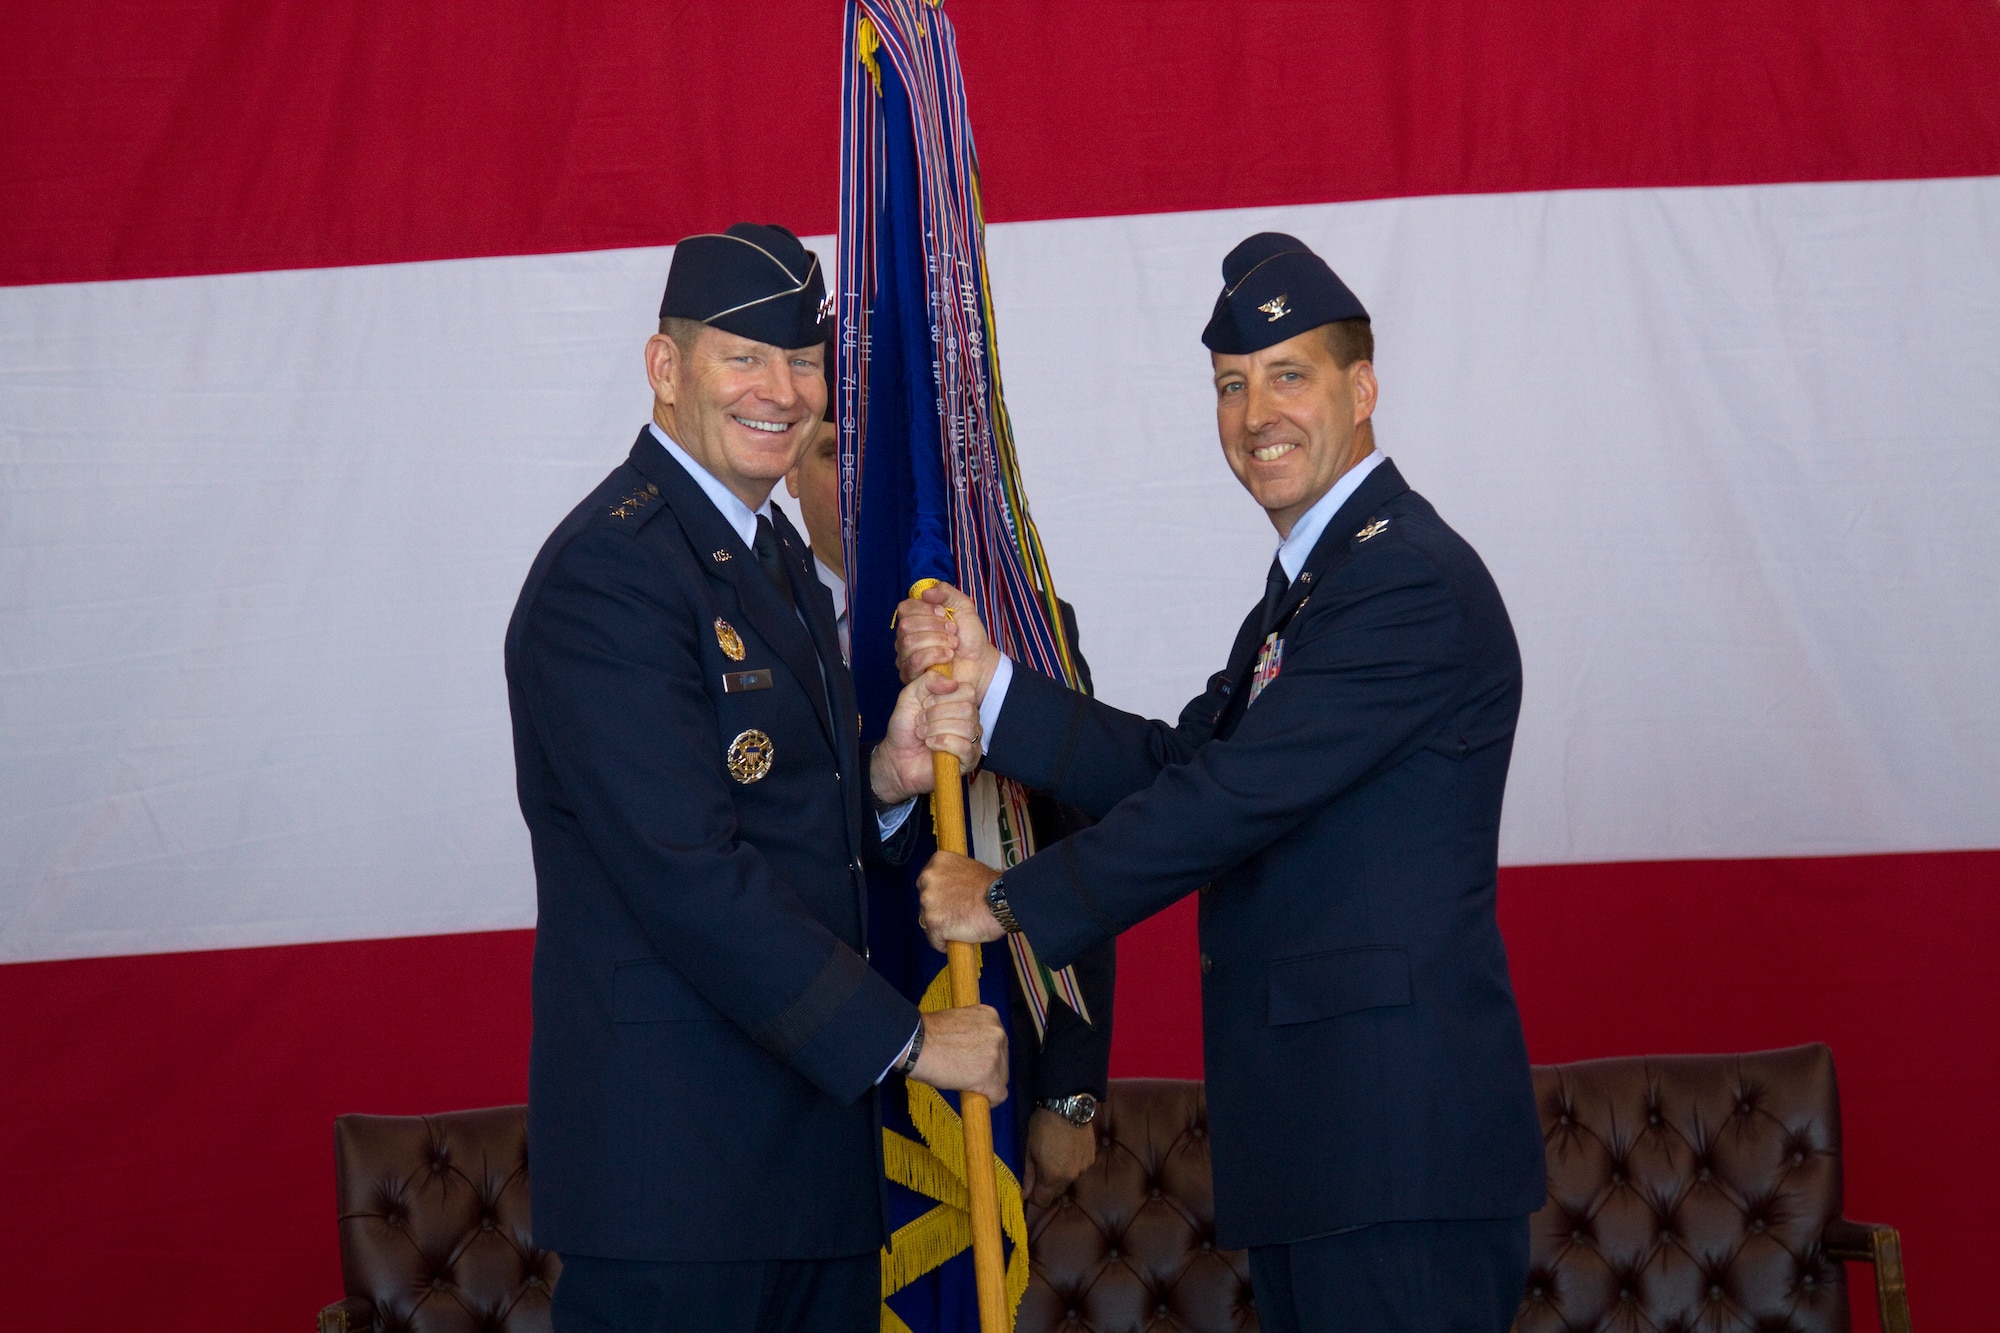 The commander of 12th Air Force (Air Forces Southern), Lt. Gen. Robin Rand (left), passes the 552nd Air Control Wing guidon to Col. Jay Bickley and with it, command of the 552nd ACW at a ceremony at Tinker Air Force Base, June 13.  Colonel Bickley replaced departing commander, Col. Gregory Guillot who will lead the 55th Wing at Offutt Air Force Base, Neb. (U.S. Air Force Photo/Master Sgt. Thomas Edwards)